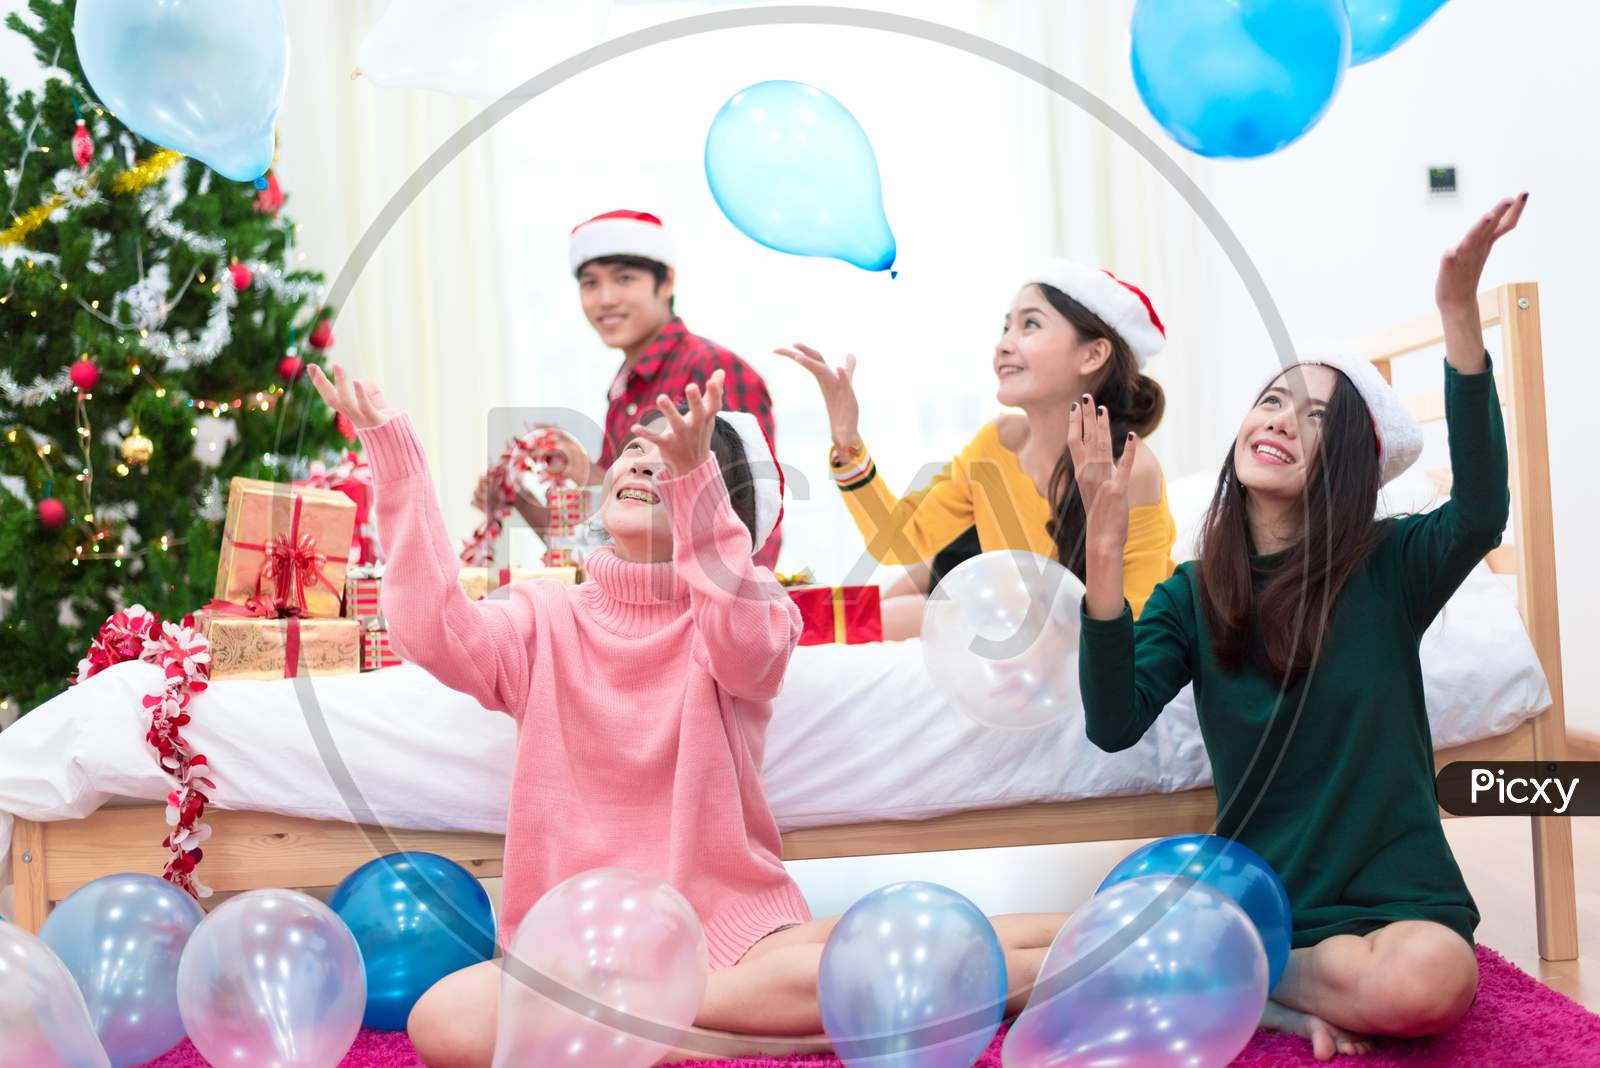 Group Of Asian People Are Throwing The Balloons For Celebrating Christmas And New Year. Holiday And Party Concept